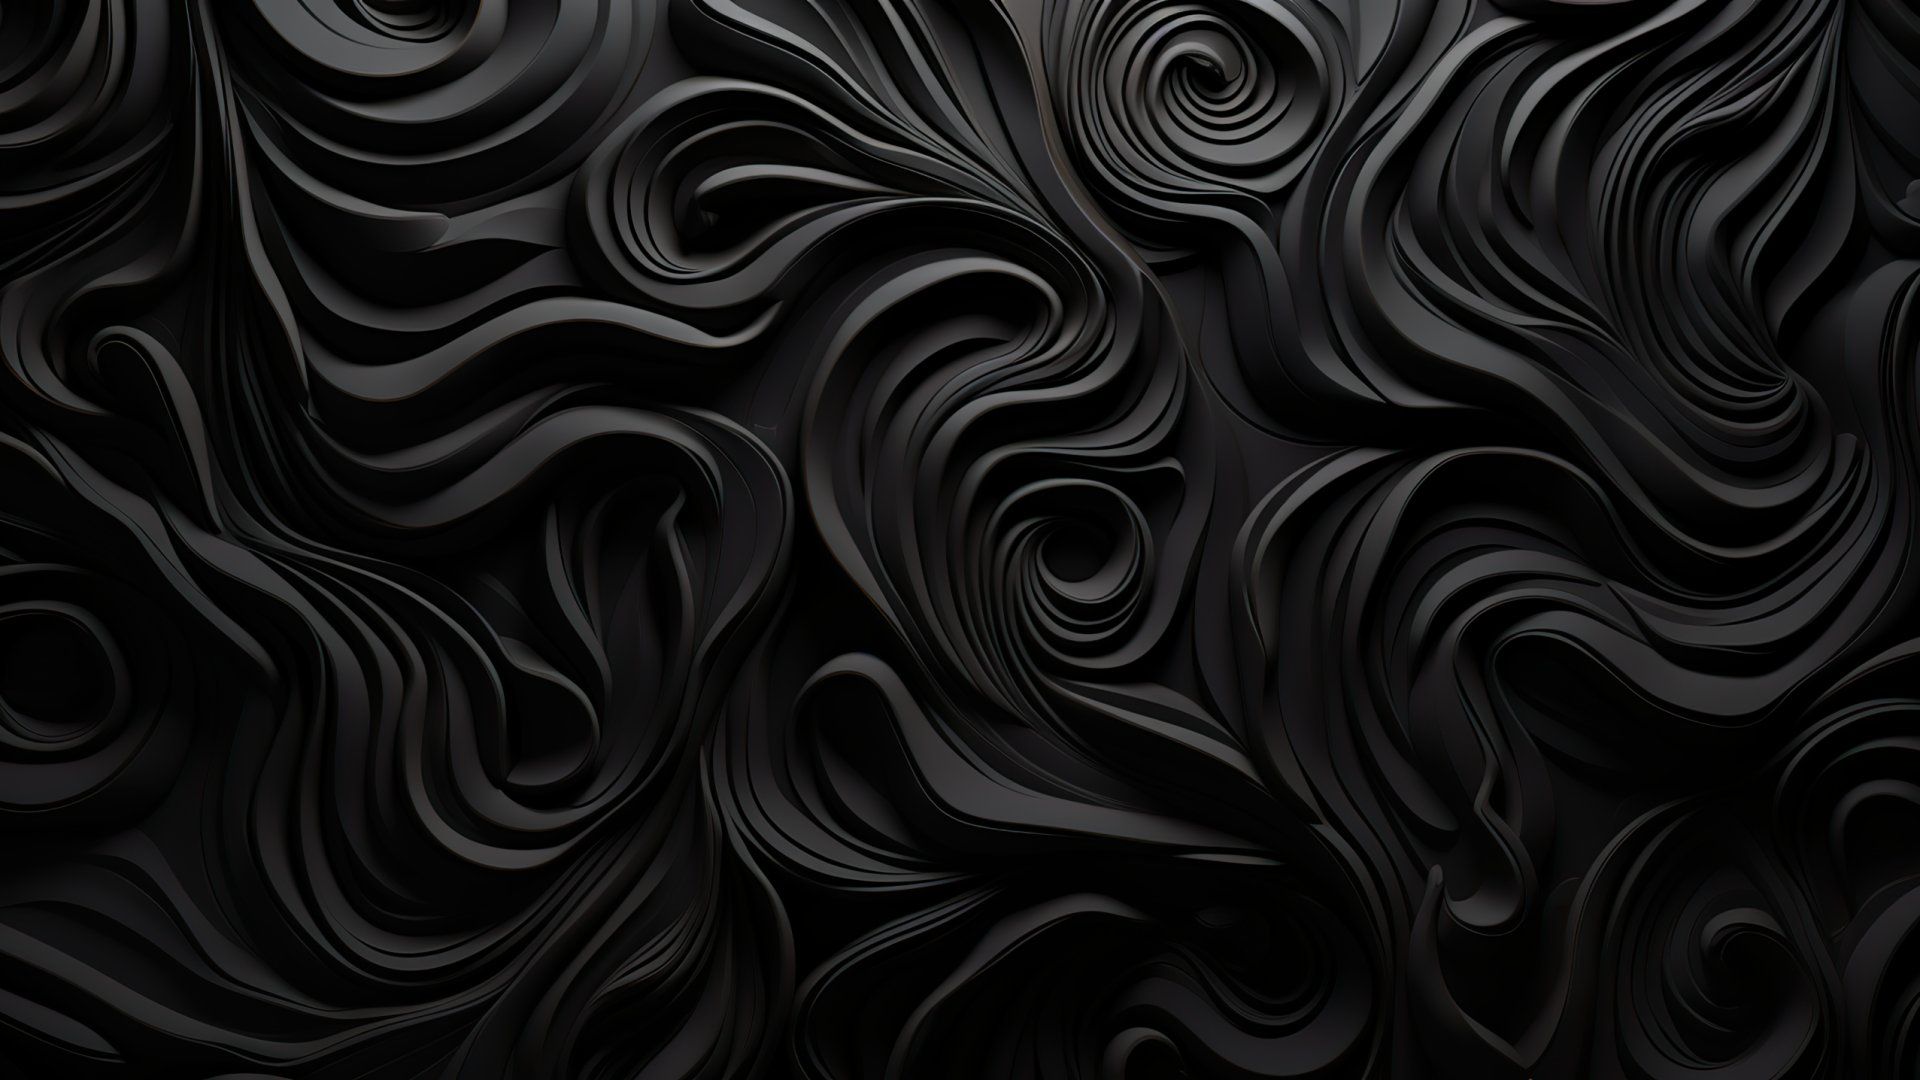 Black abstract wallpaper with a wavy pattern - Abstract